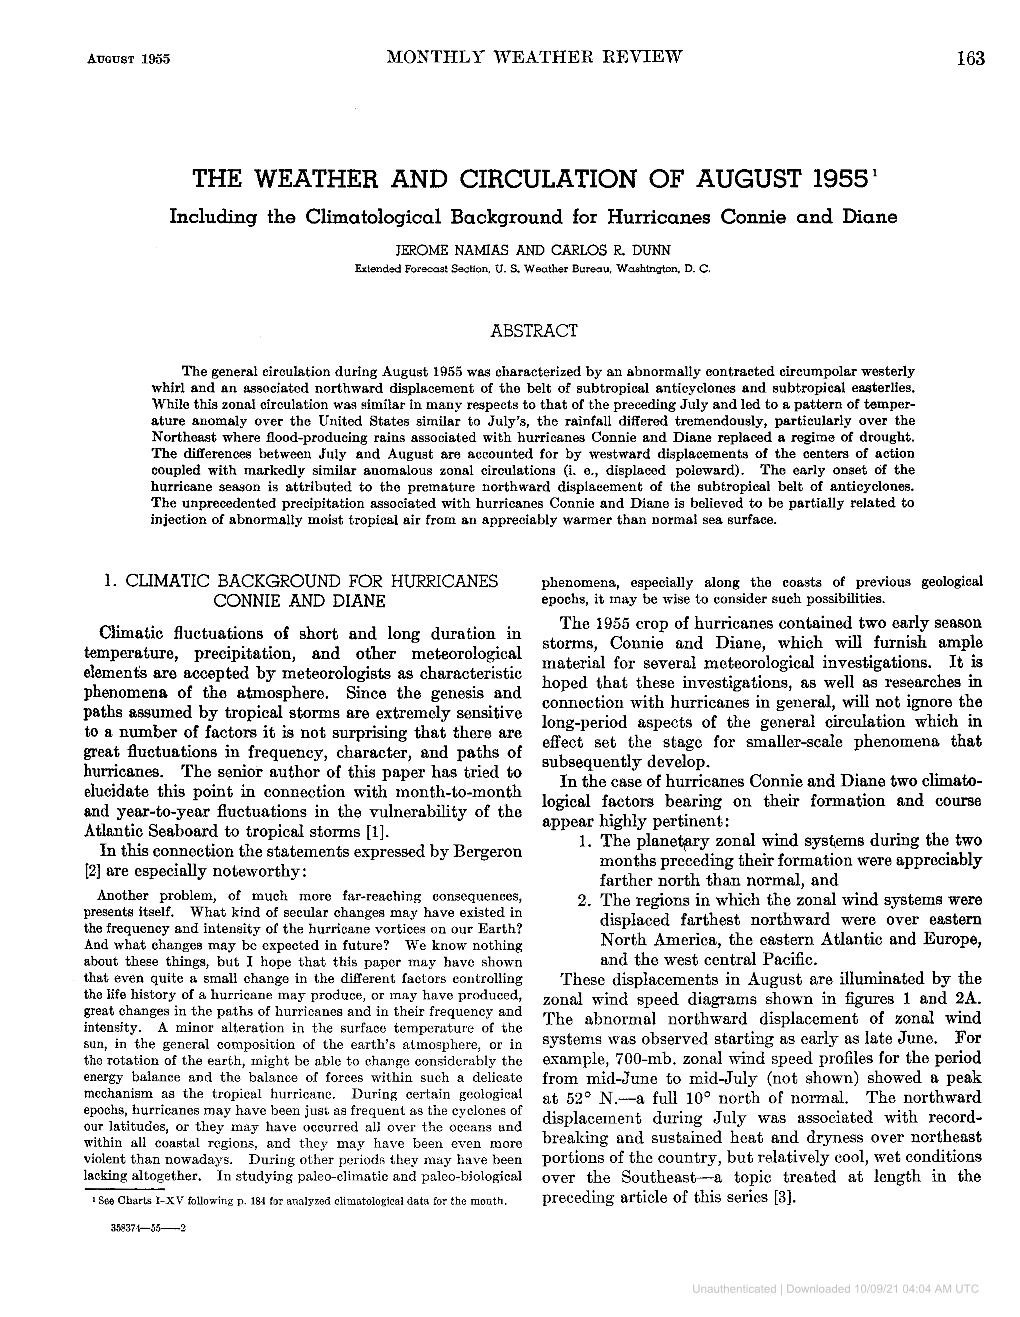 THE WEATHER and CIRCULATION of AUGUST 1955' Including the Climatologicalbackground for Hurricanes Connie and Diane JEROME NAMIAS and CARLOS R